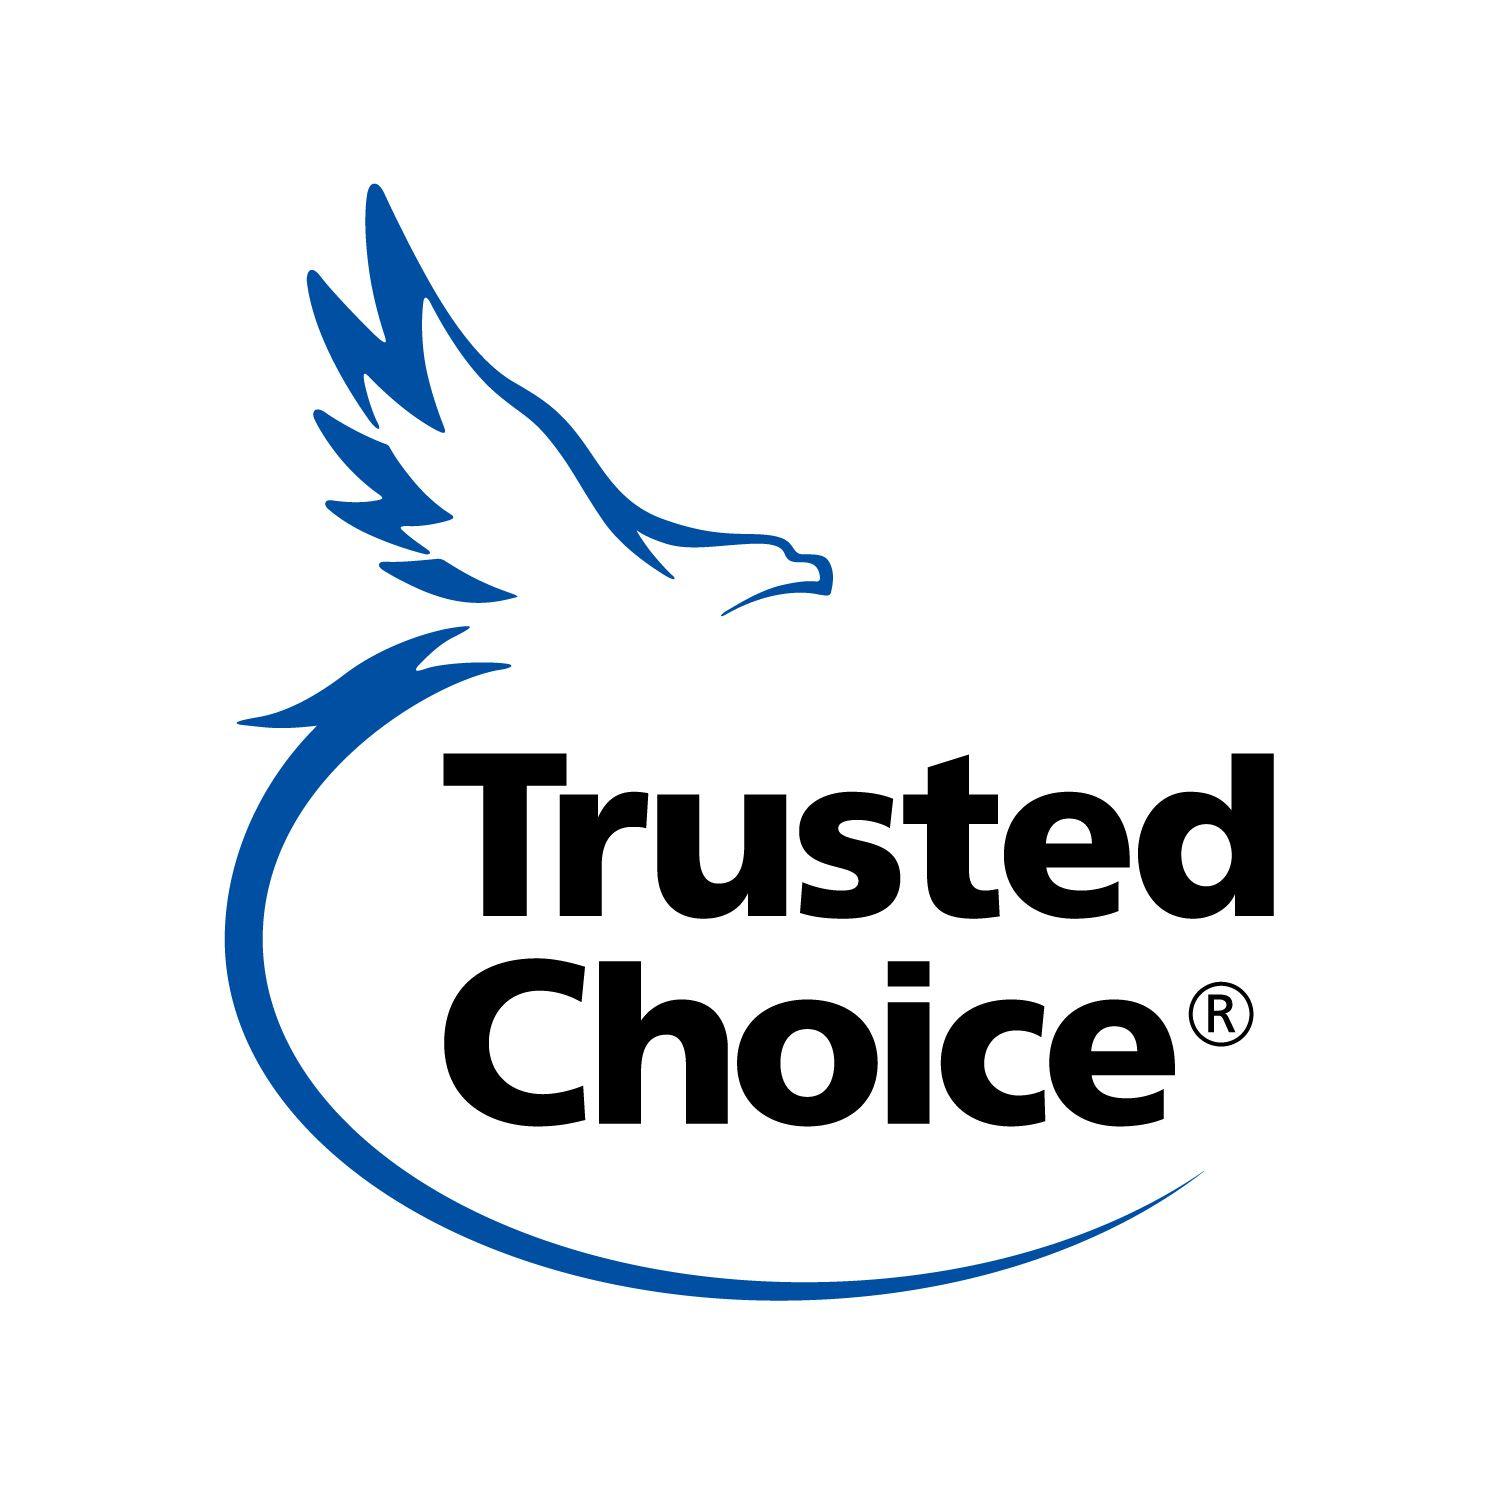 Choice Logo - Products & Tools - Download Trusted Choice Logos